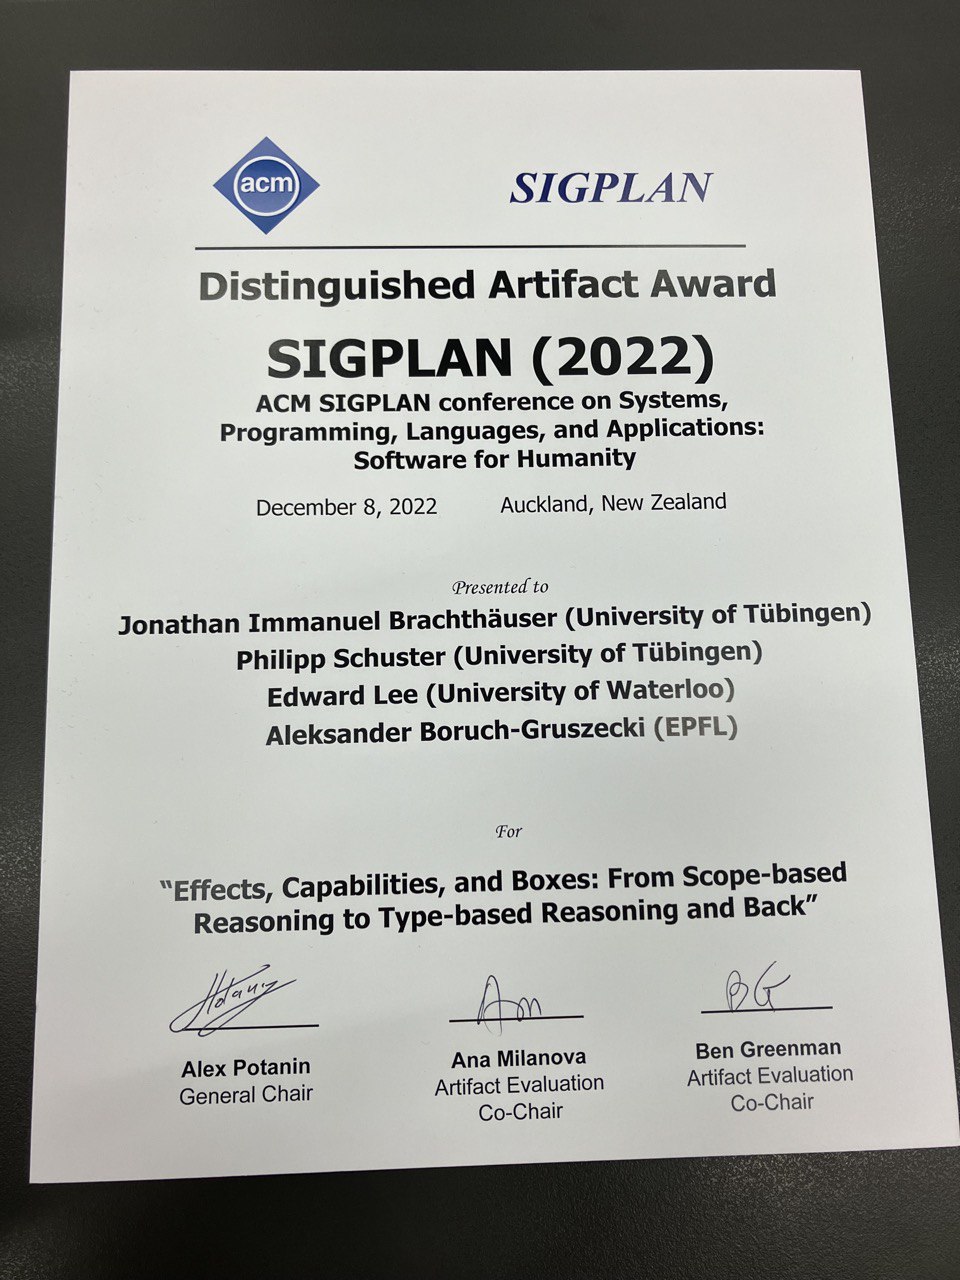 SIGPLAN -- Distinguished Artifact Award SIGPLAN (2022) -- ACM SIGPLAN conference on Systems, Programming, Languages, and Applications: Software for Humanity.
Presented to Jonathan Immanuel Brachthäuser (University of Tübingen), Philipp Schuster (University of Tübingen), Edward Lee (University of Waterloo), Aleksander Boruch-Gruszecki (EPFL) for
'Effects, Capabilities, and Boxes: From Scope-based Reasoning to Type-based Reasoning and Back'